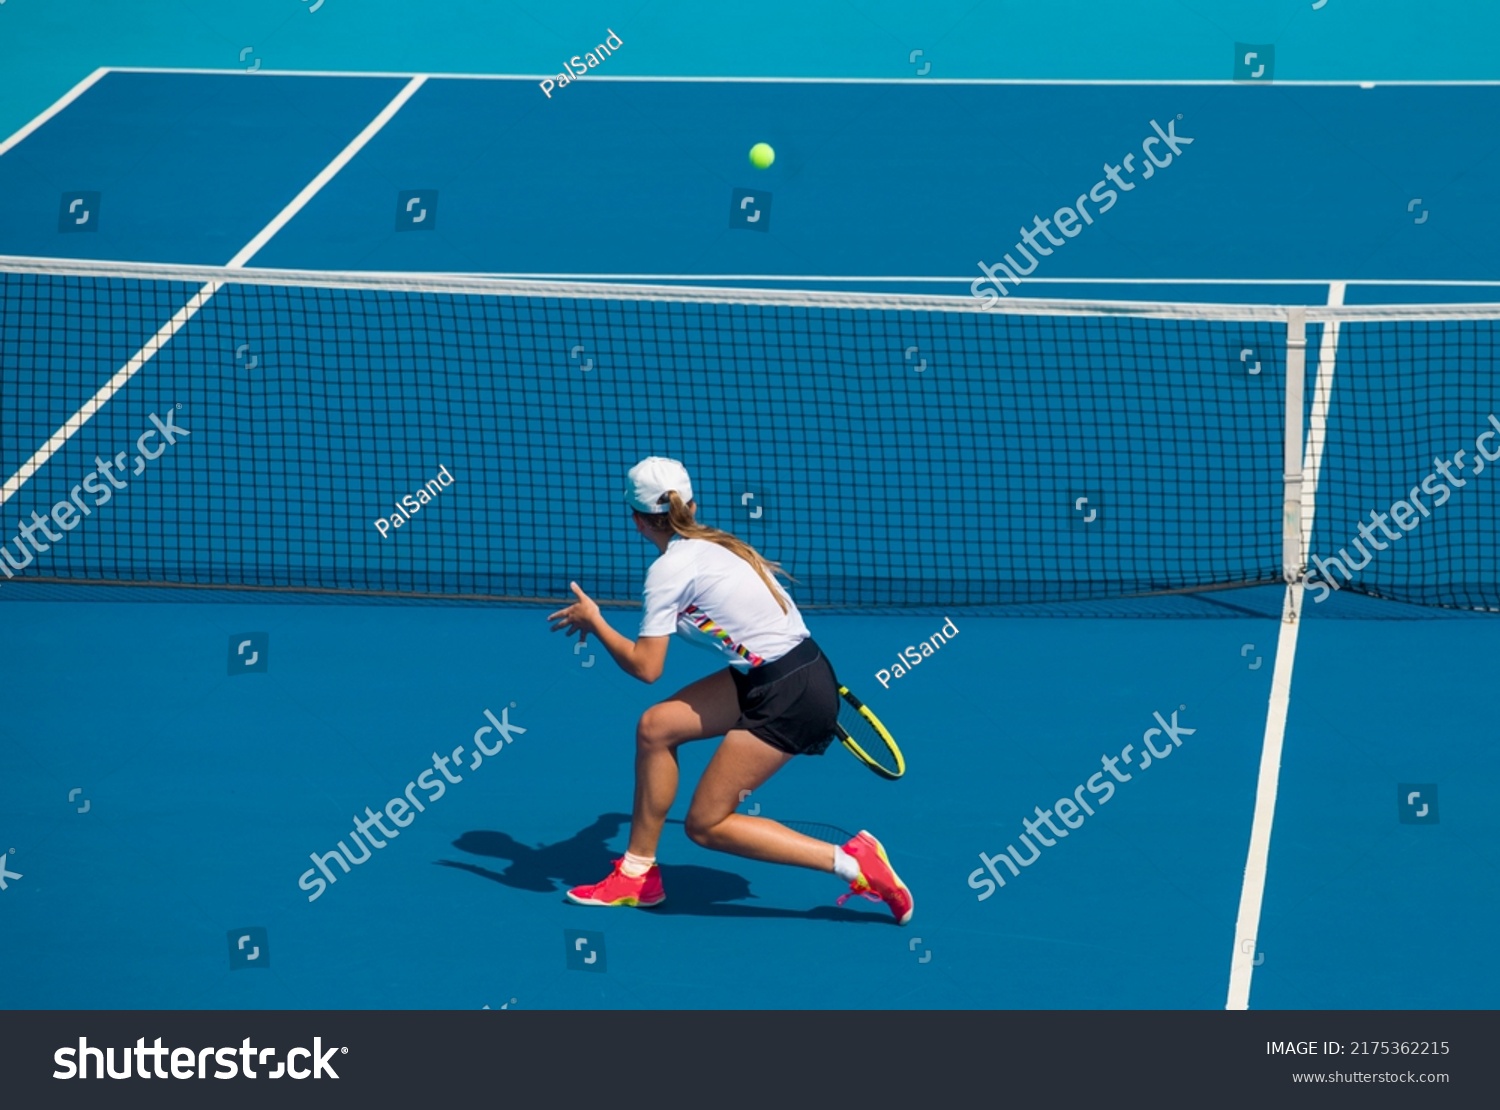 A girl plays tennis on a court with a hard blue surface on a summer sunny day #2175362215